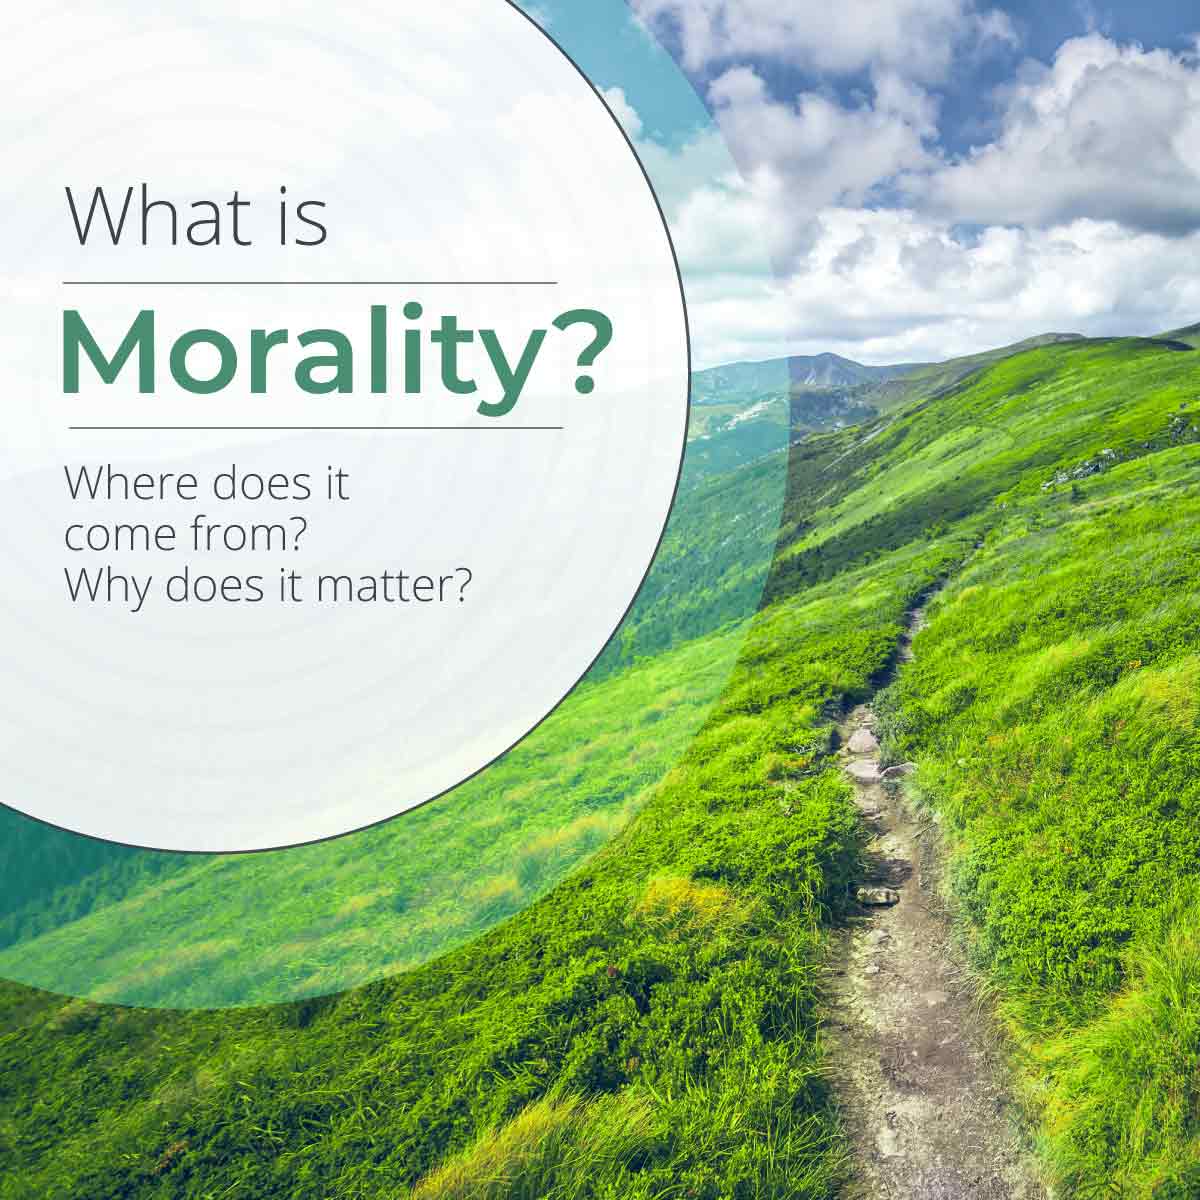 What is Morality- Definition, Where it comes from